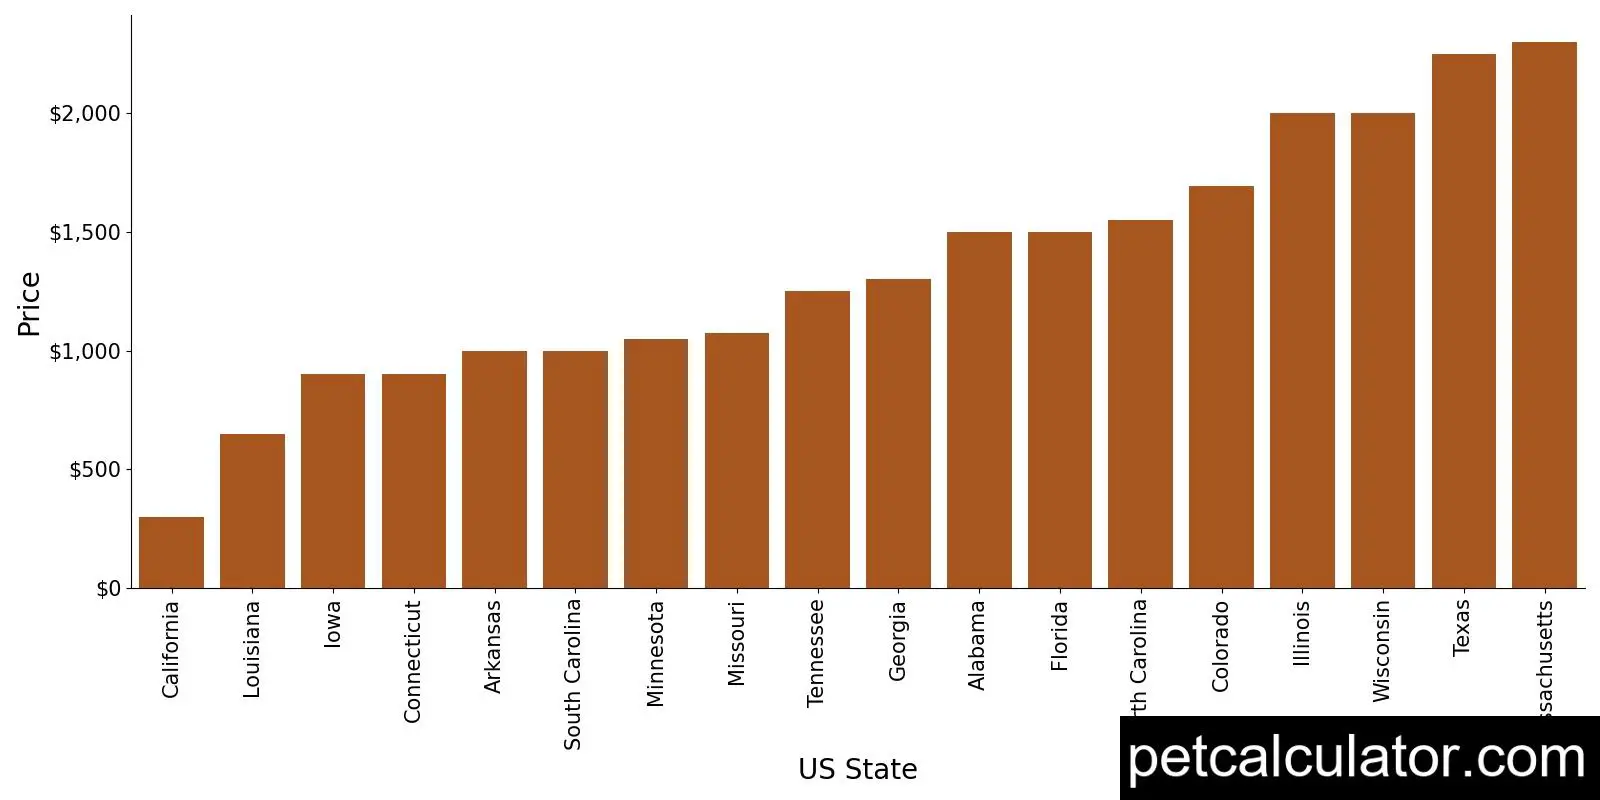 Price of English Cocker Spaniel by US State 